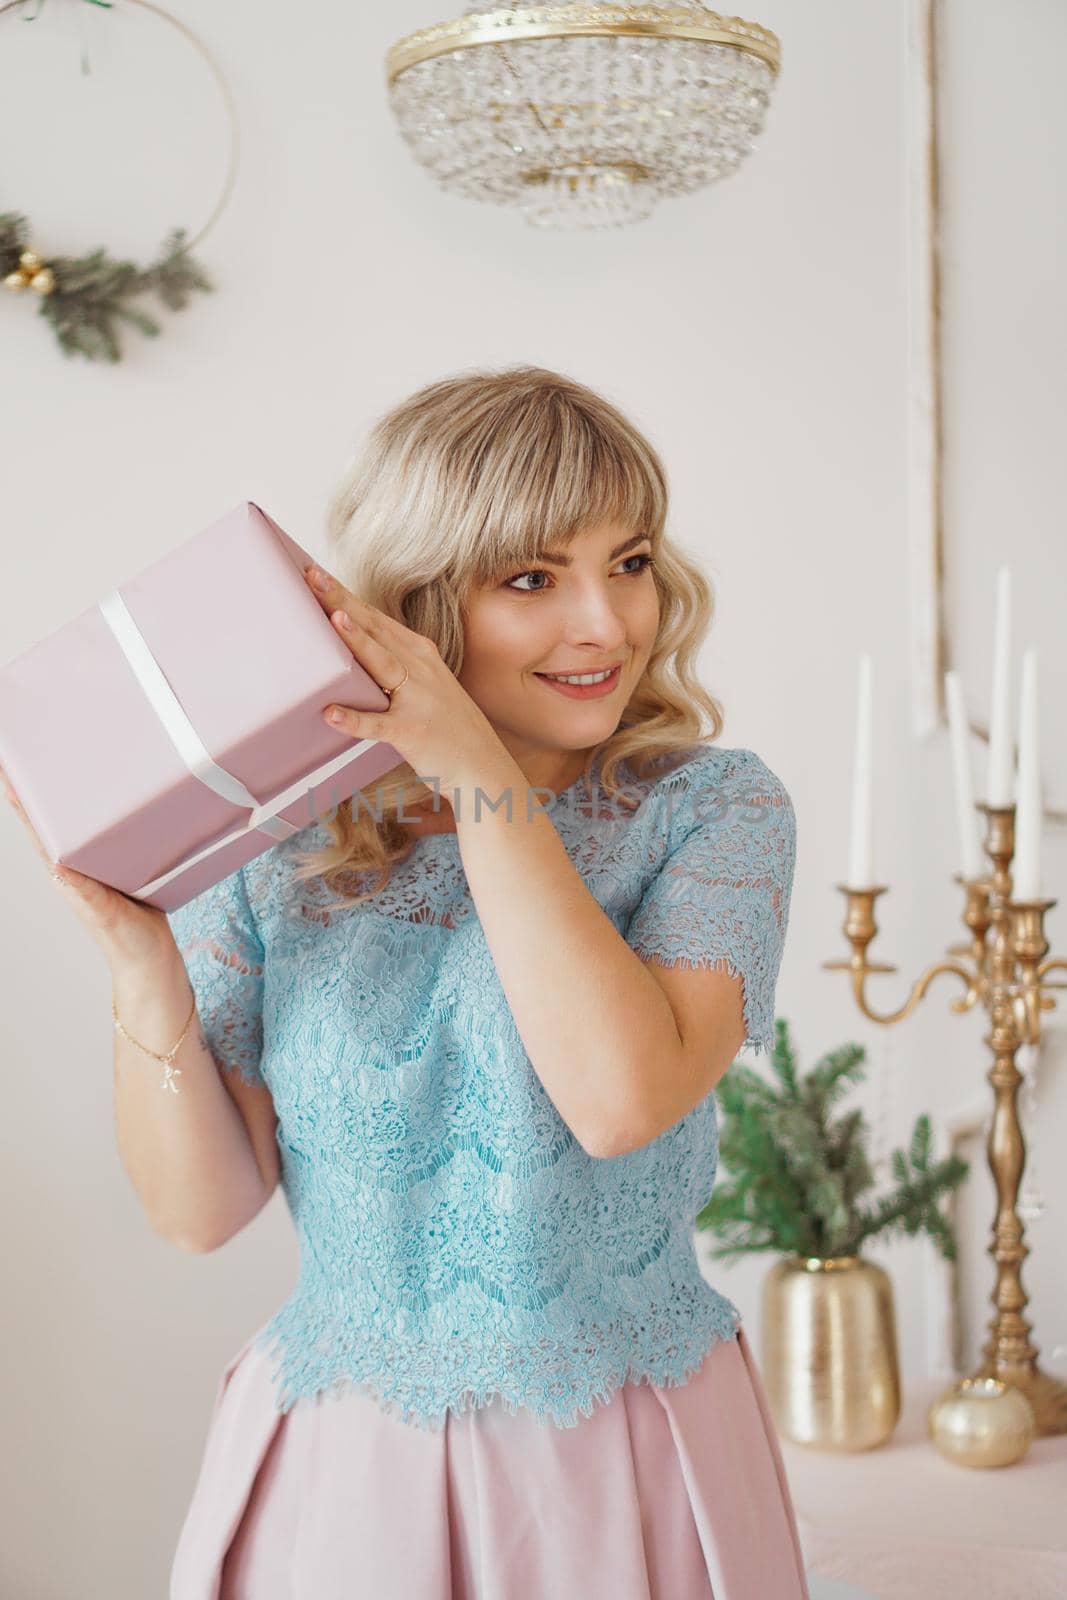 Lovely young woman with elegant style sitting indoor with pink Christmas present by natali_brill